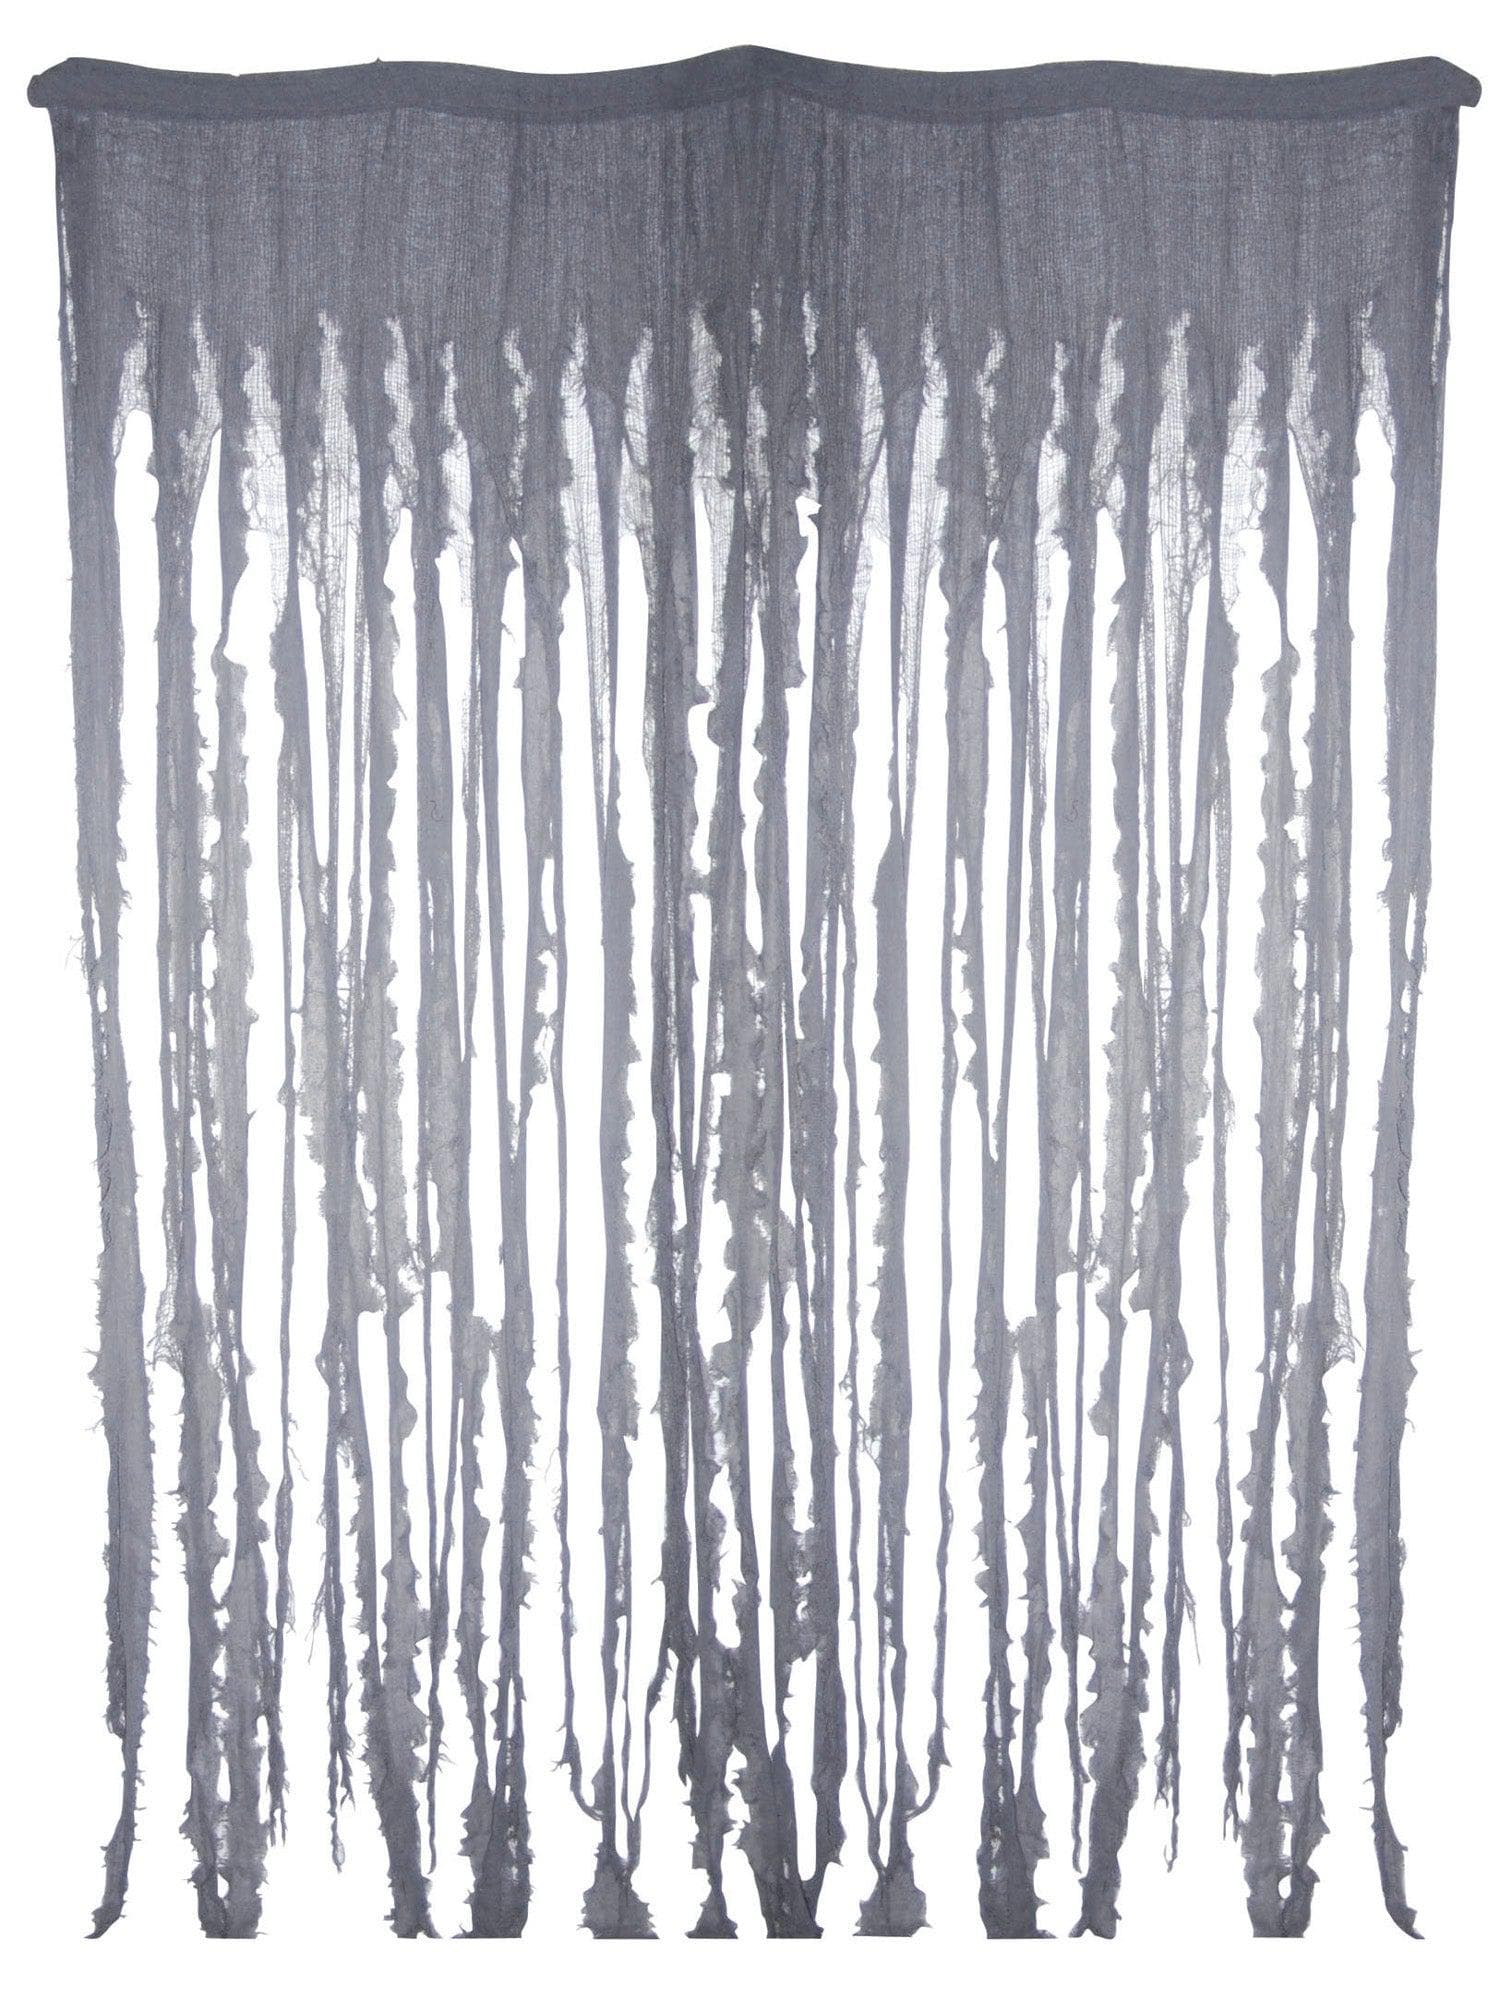 8 Foot Black Tattered Cloth Entryway Decor - costumes.com